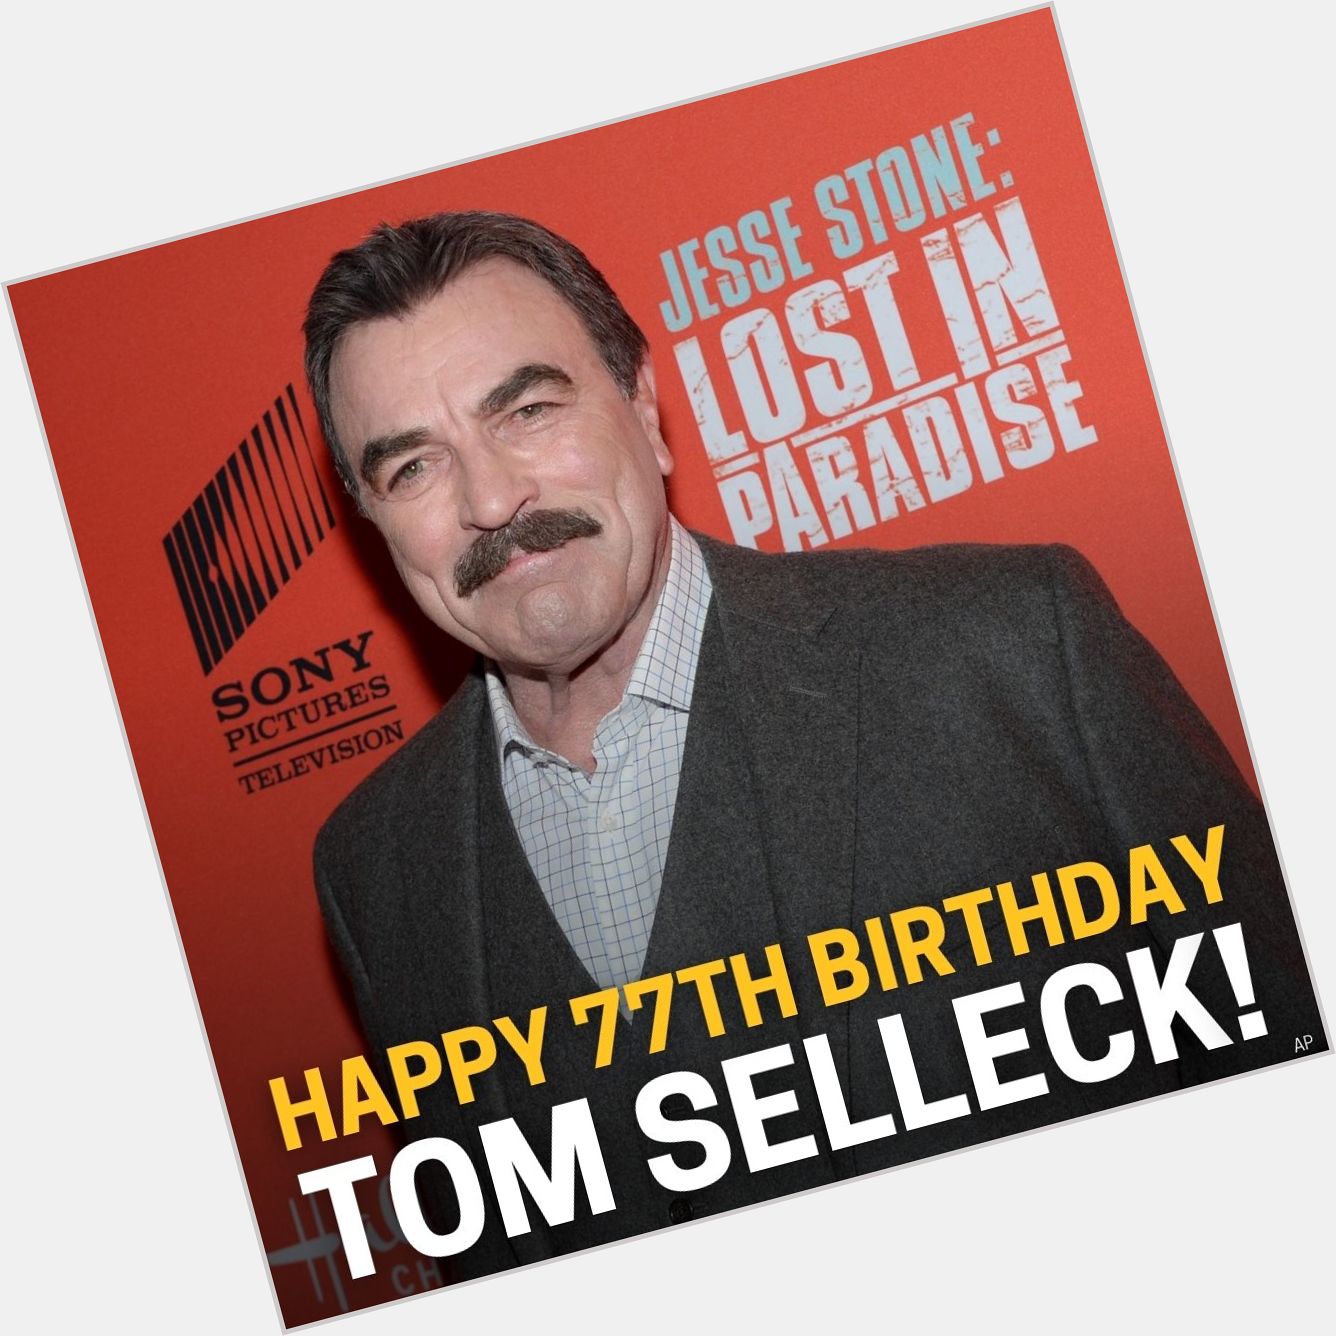 Happy 77th Birthday to Tom Selleck. He is best known for playing Thomas Magnum in the TV show \"Magnum, P.I.\" 